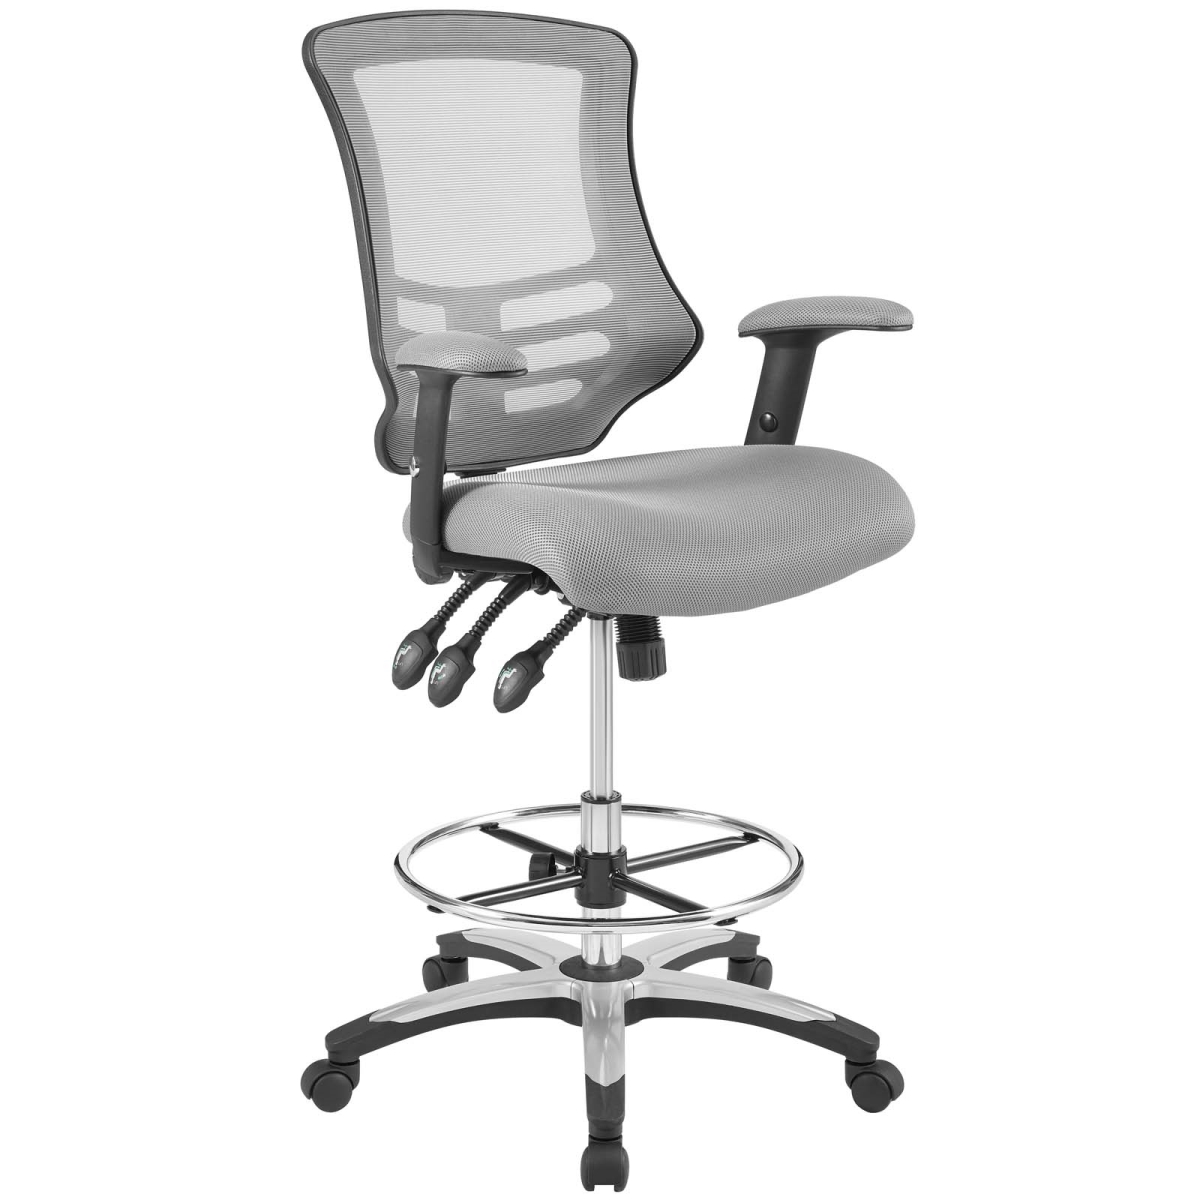 Eei-3043-gry Calibrate Mesh Drafting Chair - Gray, 42.5 - 52.5 X 26.5 X 27 In.